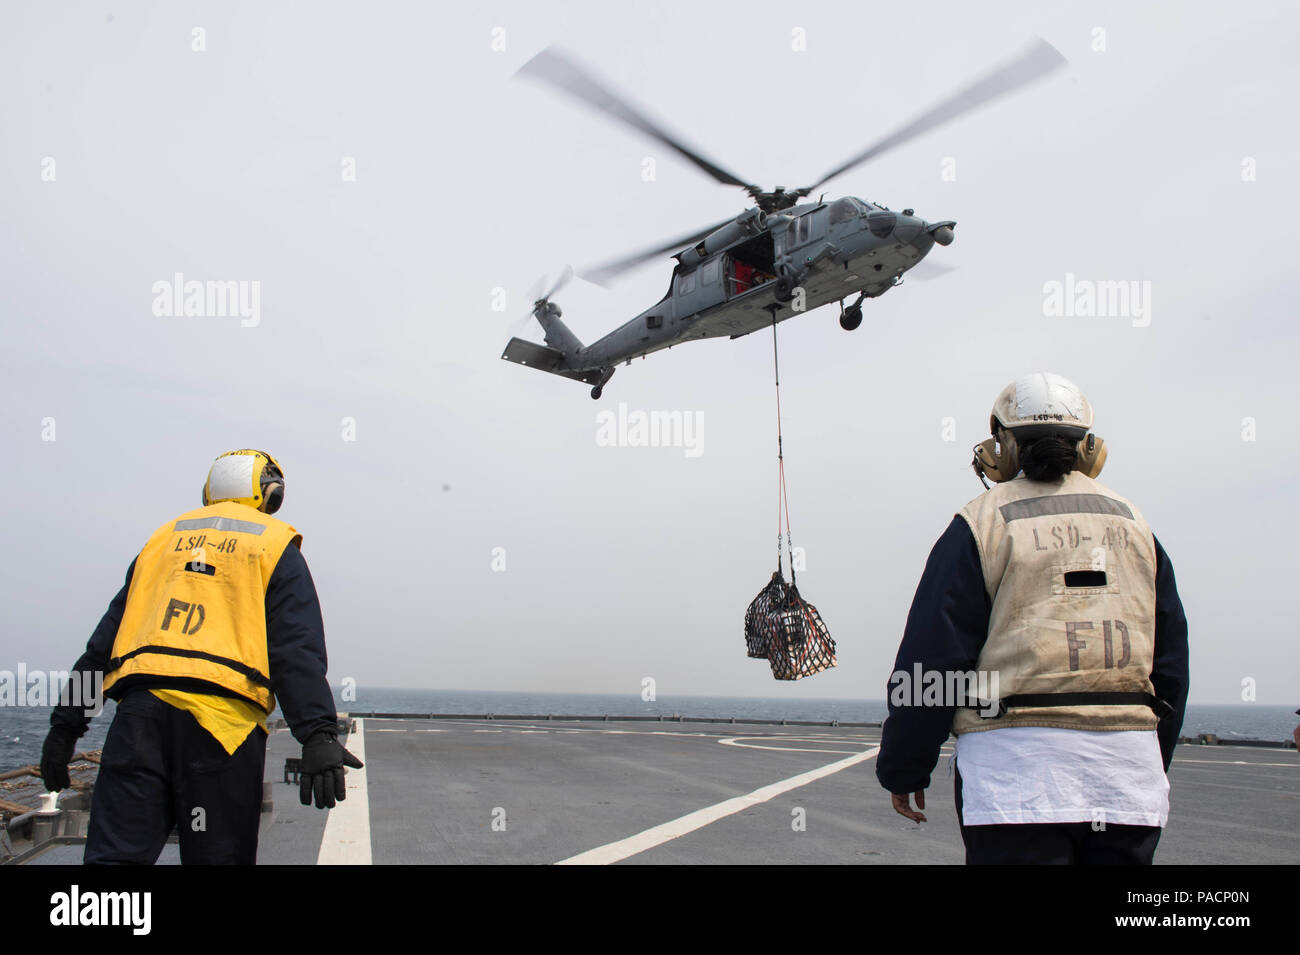 160316-N-RM689-070 EAST SEA (March 16, 2016) - Sailors assigned to amphibious dock landing ship USS Ashland (LSD 48) guide a pallet down onto the flight deck during a vertical replenishment (VERTREP) at sea. Ashland is assigned to the Bonhomme Richard Expeditionary Strike Group and is participating in Ssang Yong 16, a biennial combined amphibious exercise conducted by forward-deployed U.S. forces with the Republic of Korea navy and Marine Corps, Australian army and Royal New Zealand army forces in order to strengthen our interoperability and working relationships across a wide range of militar Stock Photo